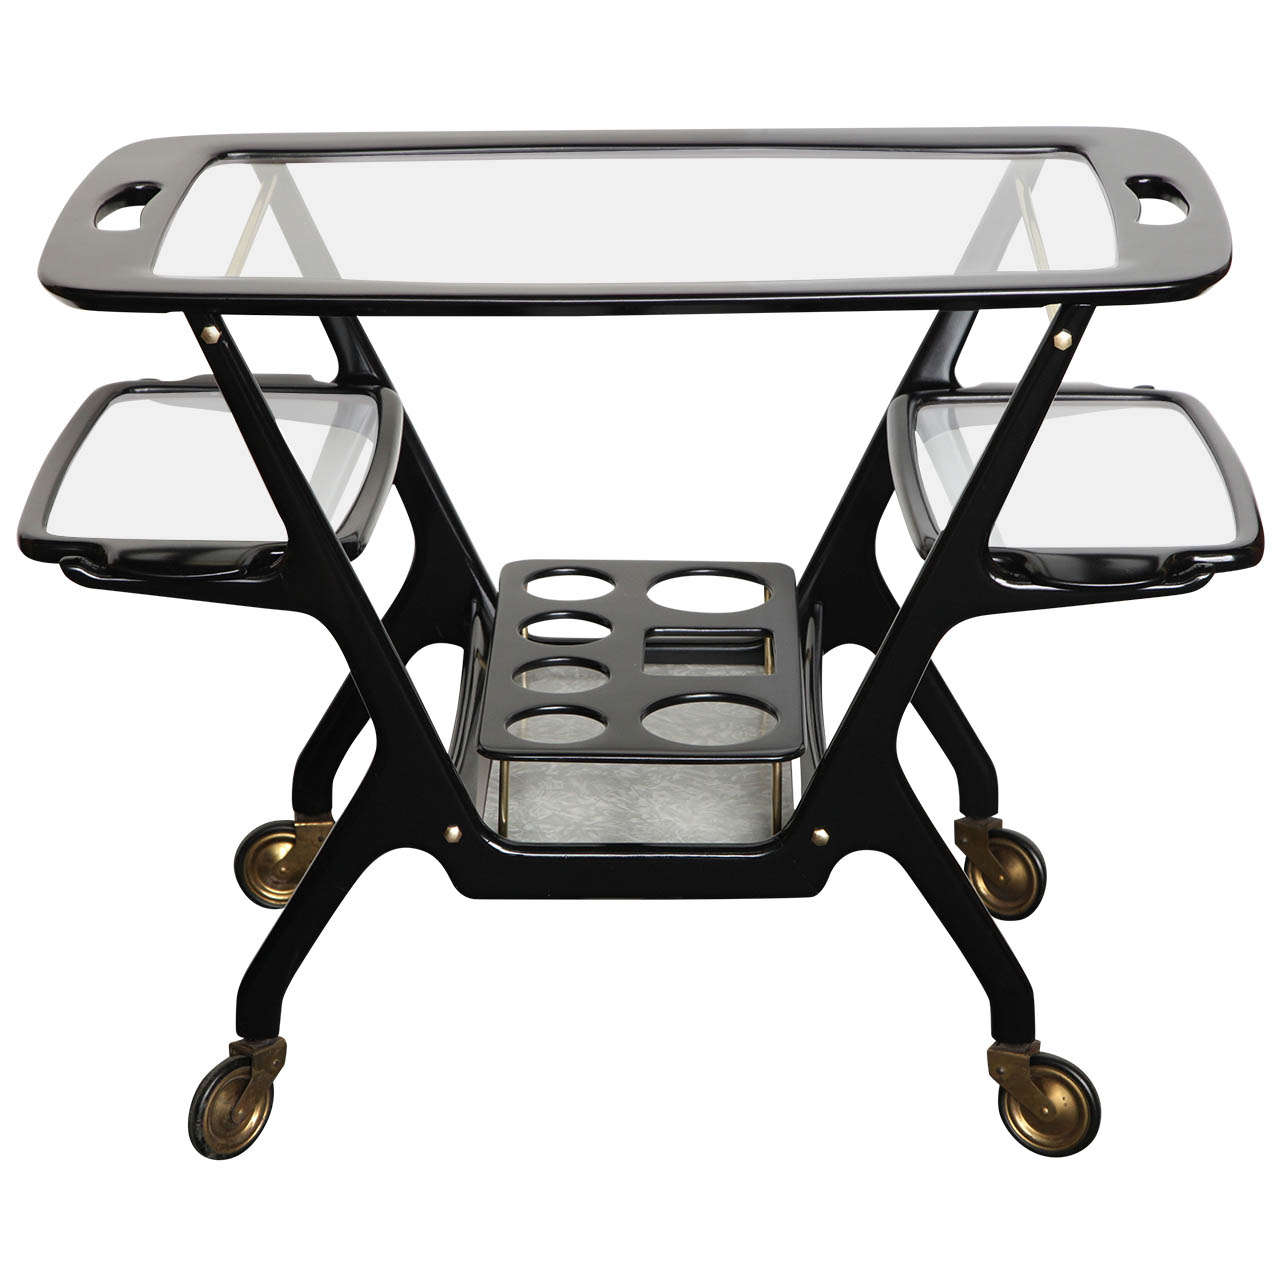 Bar / Serving Cart Designed by C. Lacca